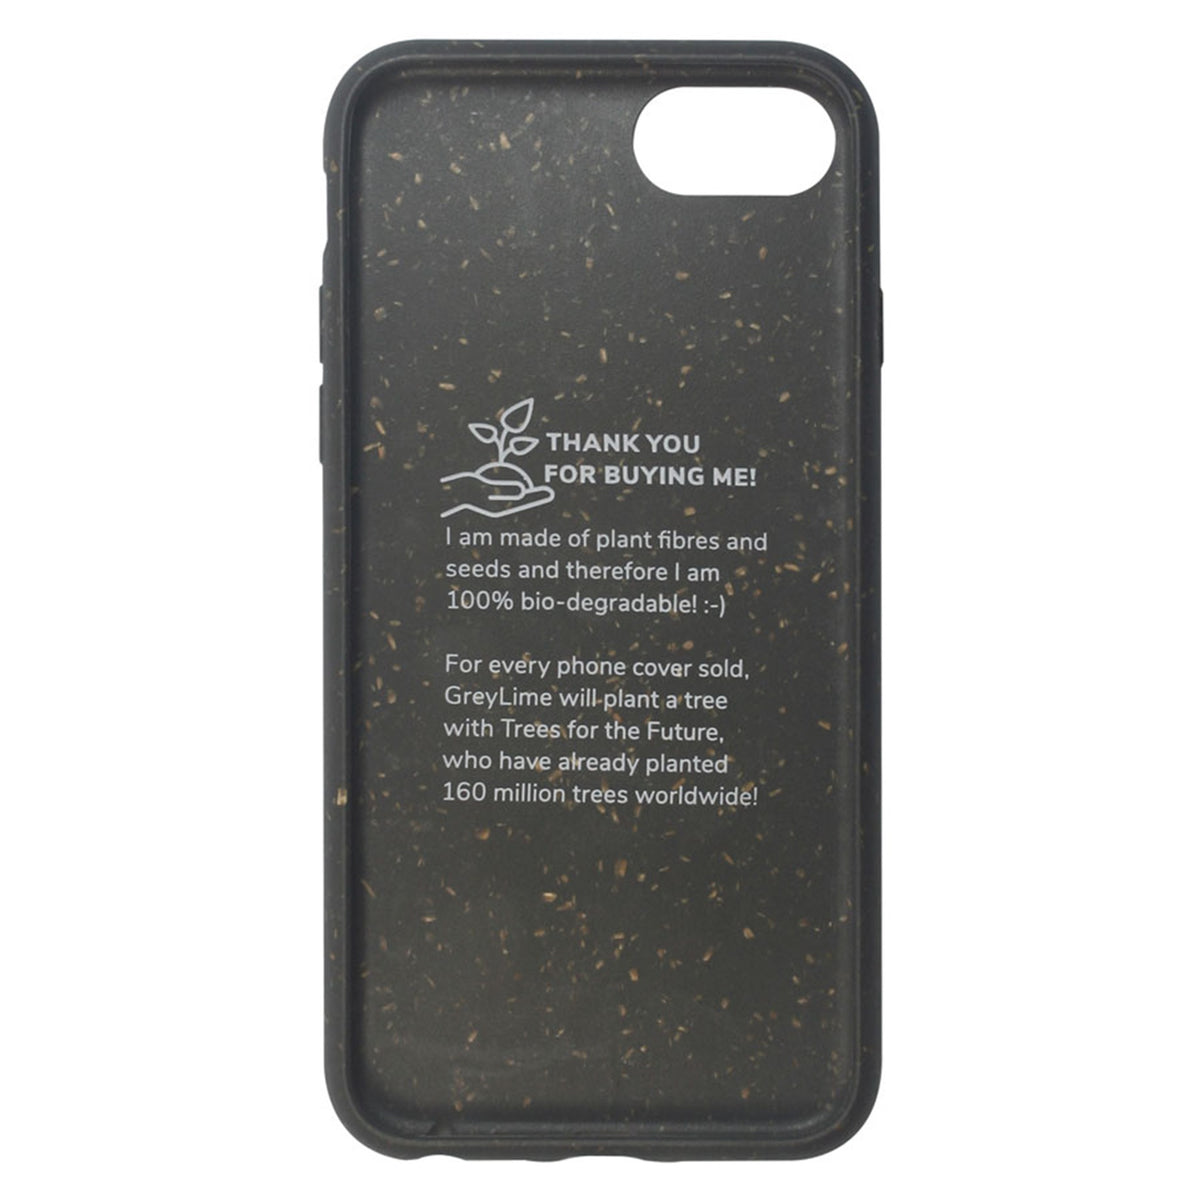 COIP67810 Greylime Iphone 678SE Biodegradable Cover Black 5